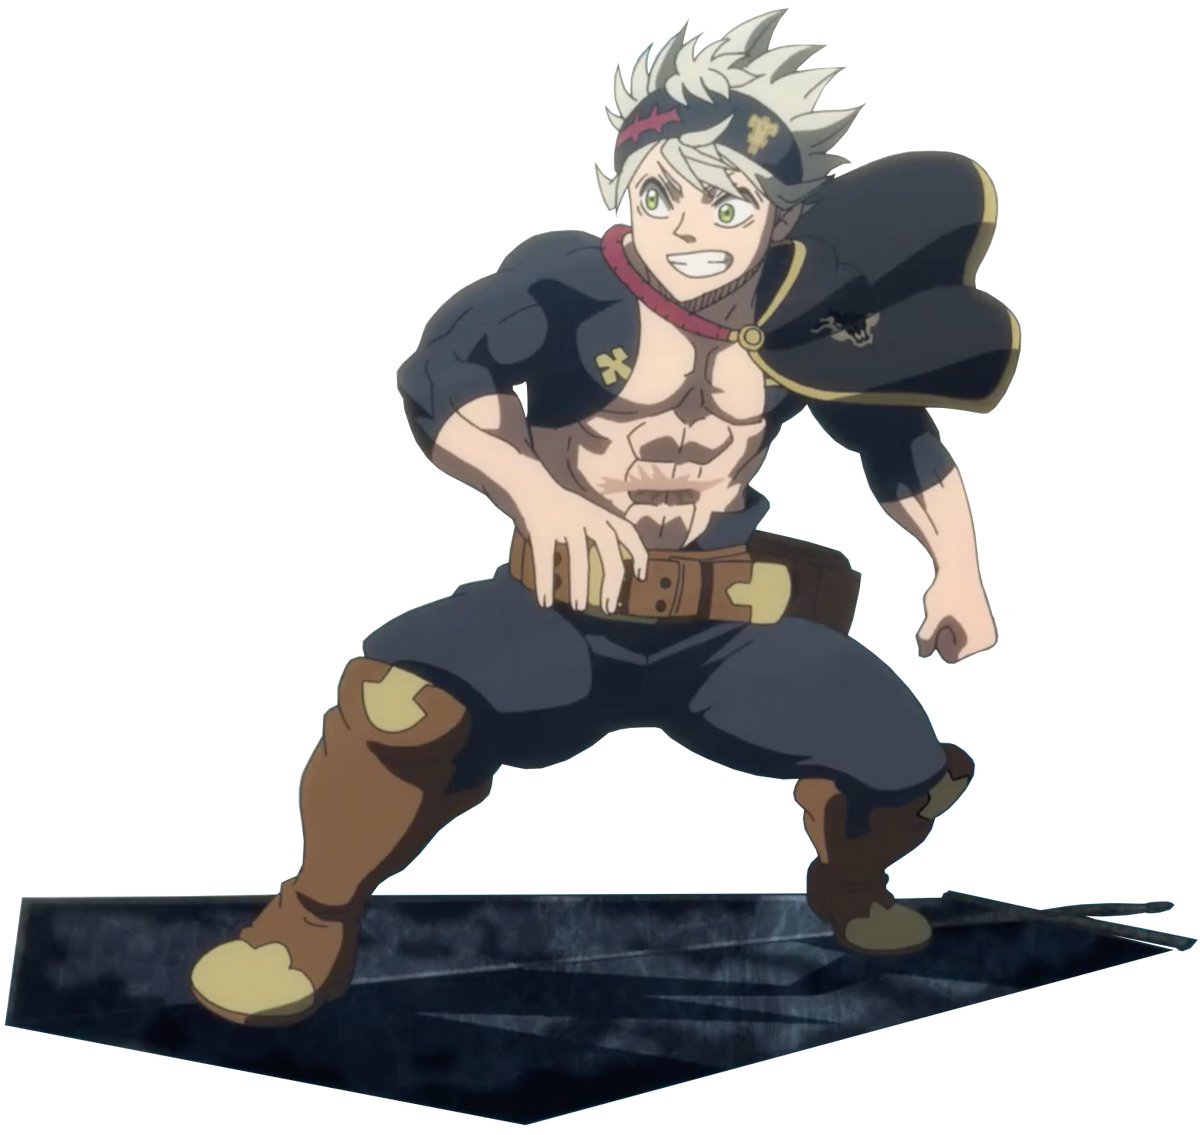 Black Clover Swords Breakdown: All About Anti-Magic Weapons